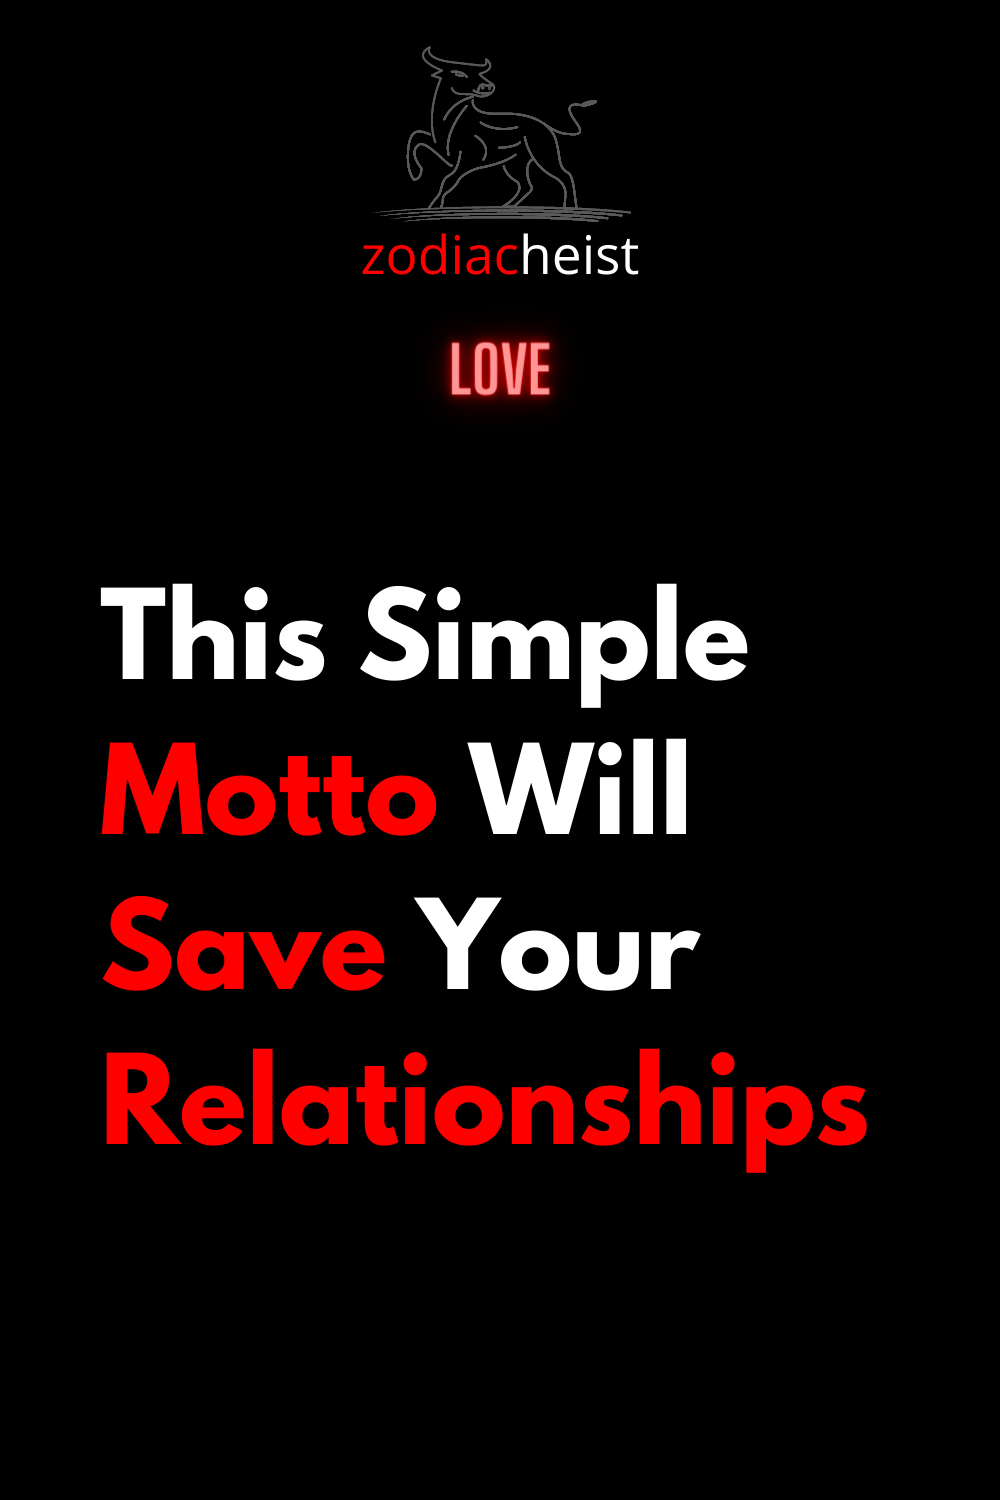 This Simple Motto Will Save Your Relationships